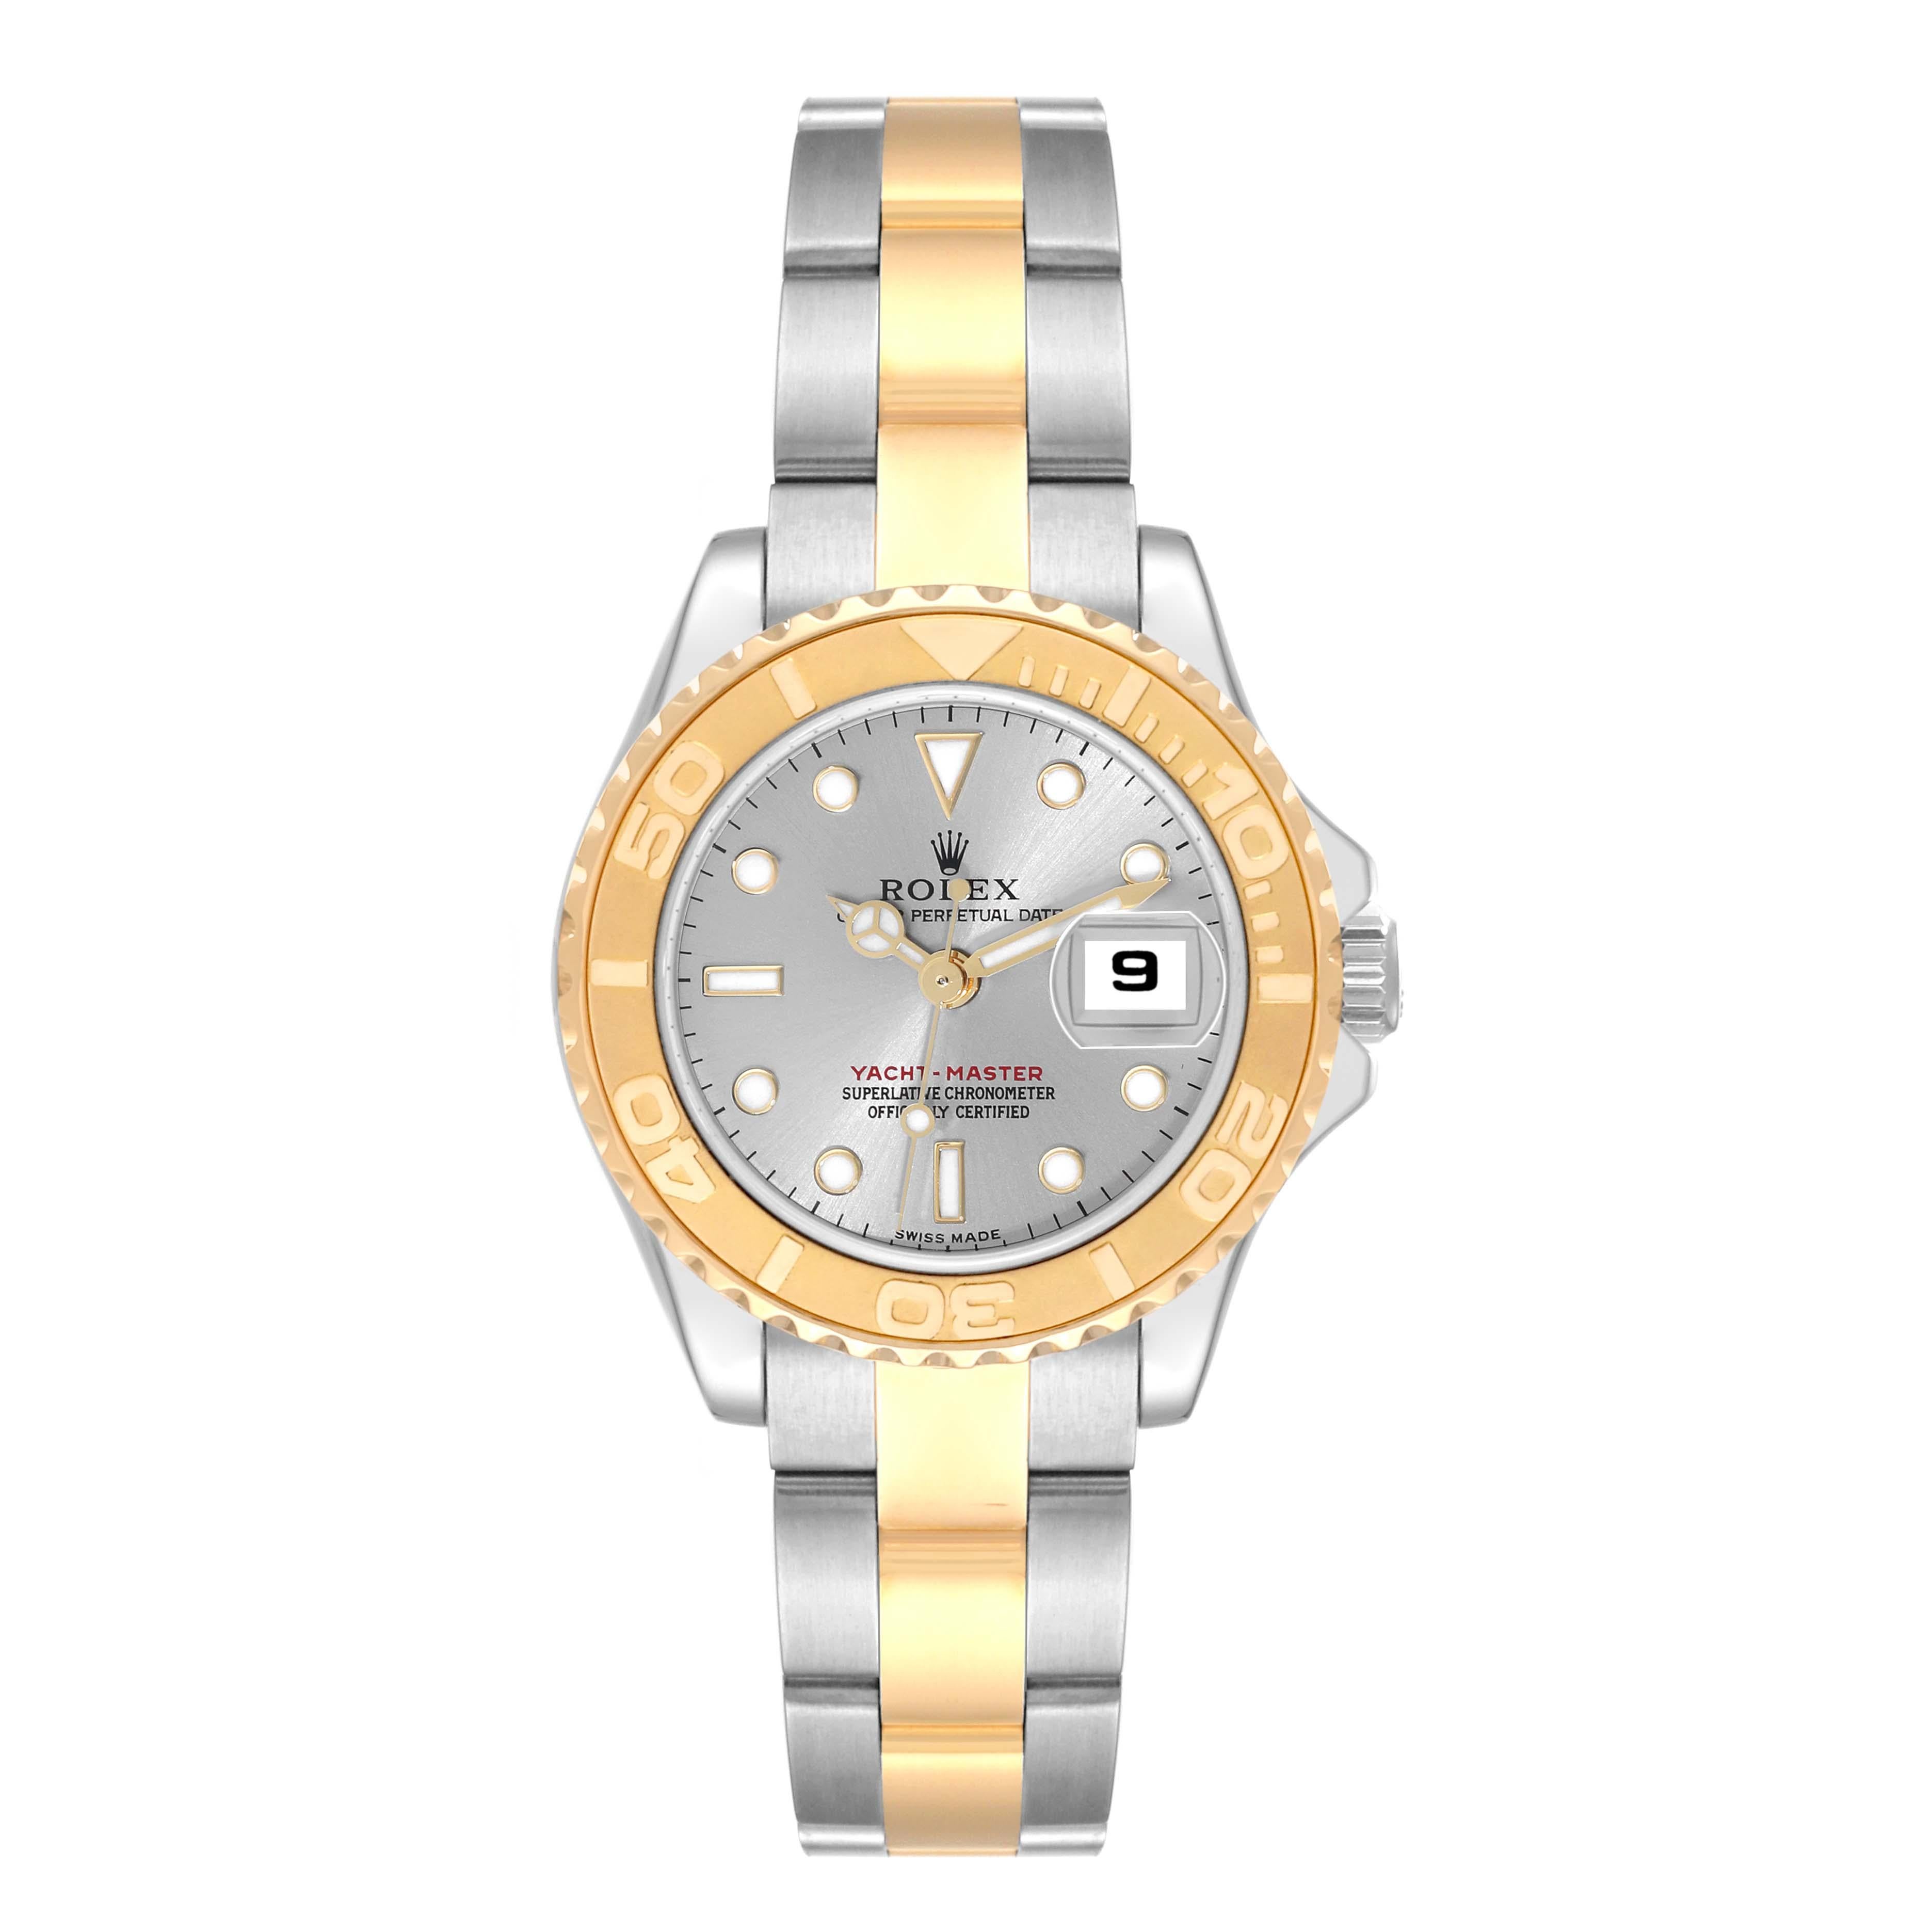 Rolex Yachtmaster 29 Steel Yellow Gold Ladies Watch 169623 Box Papers. Officially certified chronometer automatic self-winding movement. Stainless steel and 18K yellow gold case 29 mm in diameter. Rolex logo on a crown. 18K yellow gold special